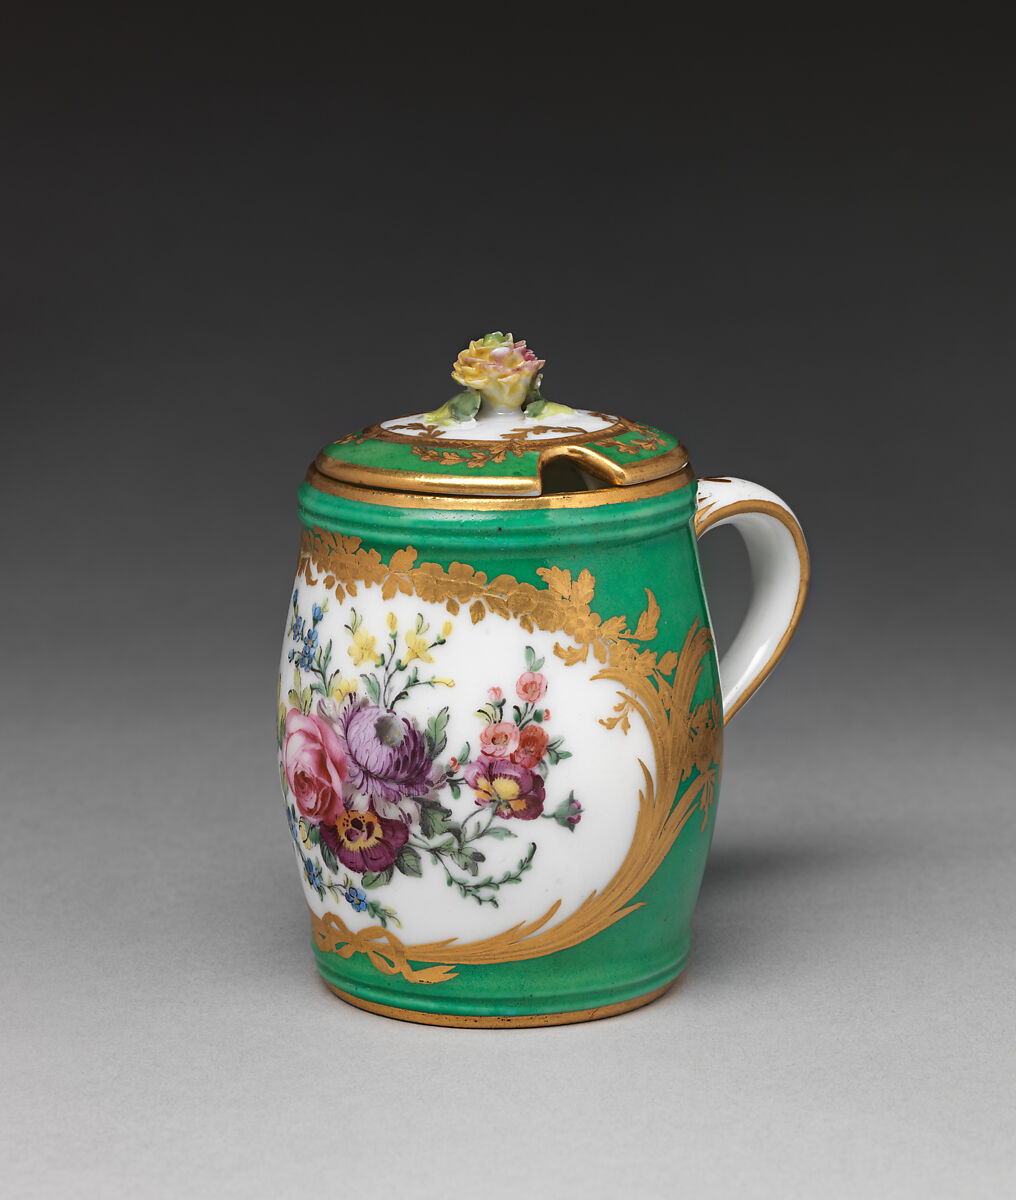 Mustard pot with cover (one of two) (part of a service), Sèvres Manufactory (French, 1740–present), Soft-paste porcelain, French, Sèvres 